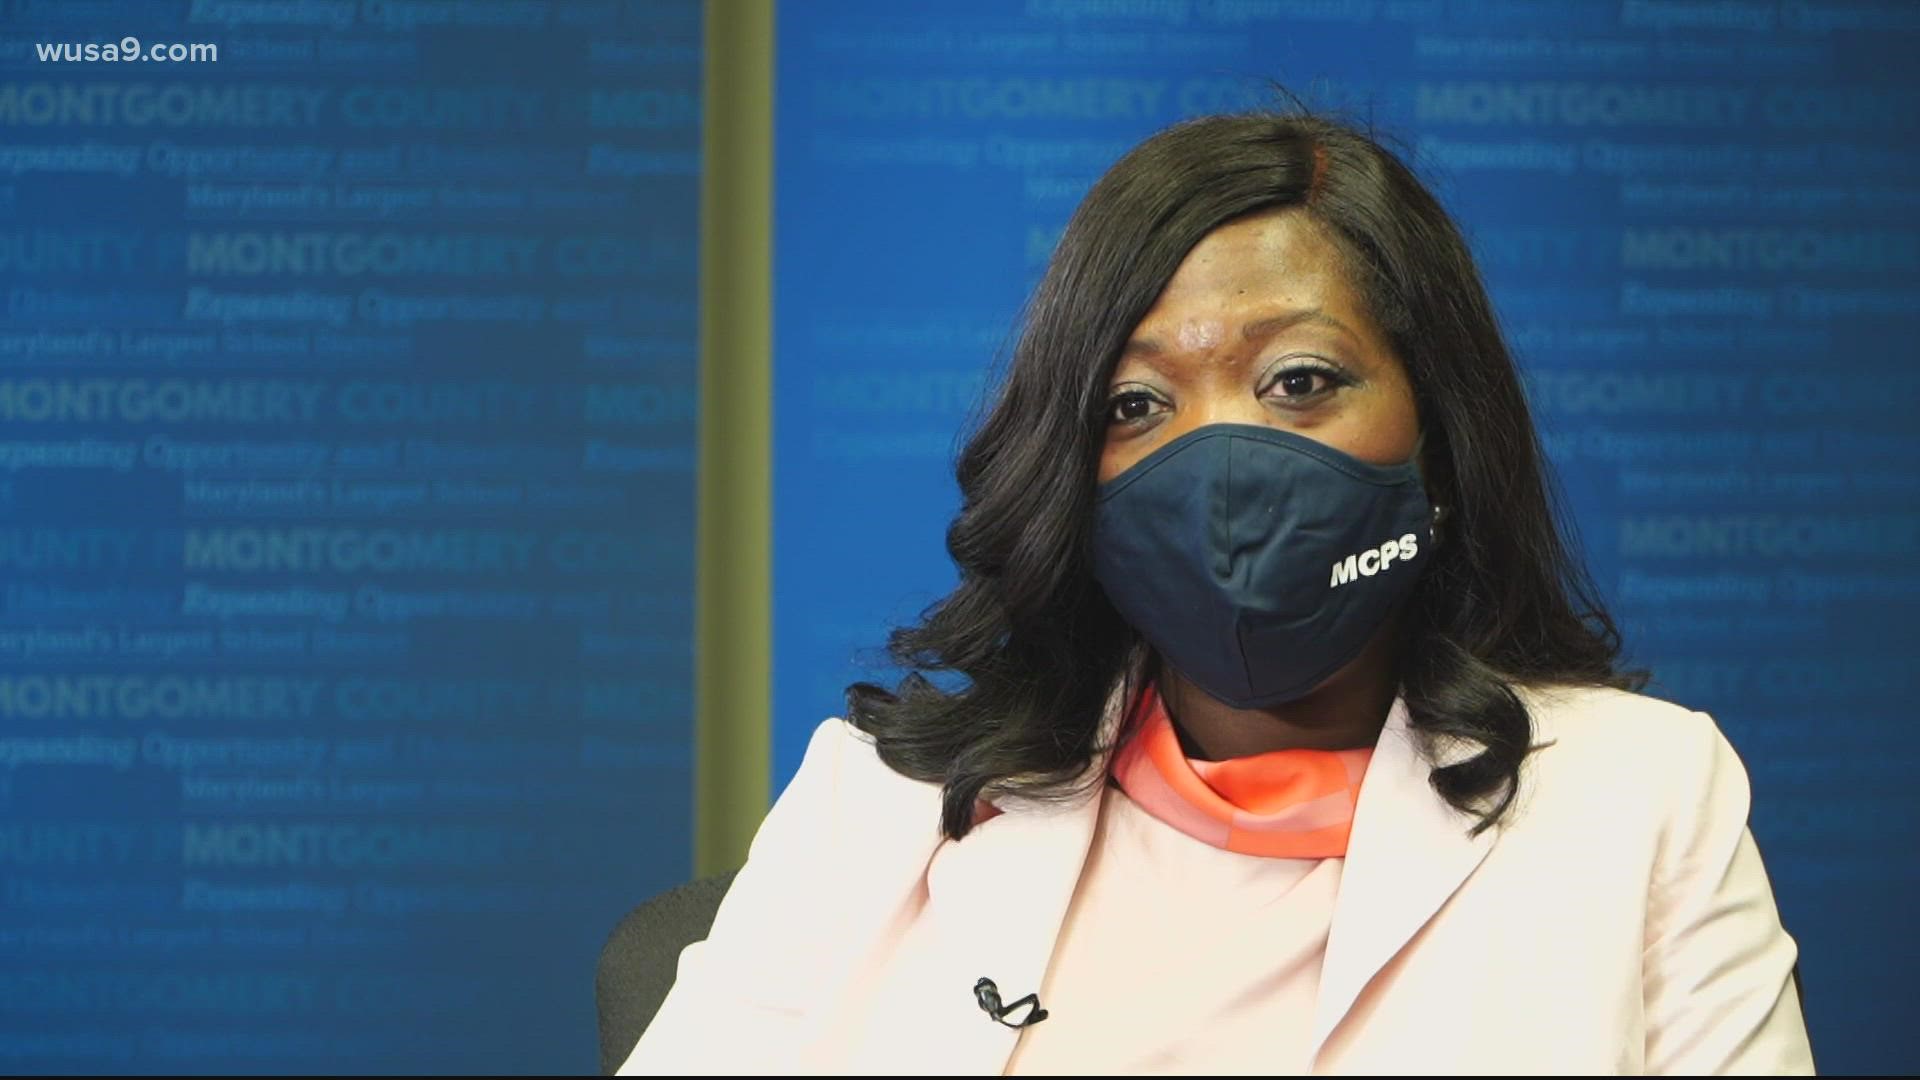 We sat down with Dr. Monifa McKnight to discuss what's ahead for Montgomery County students.